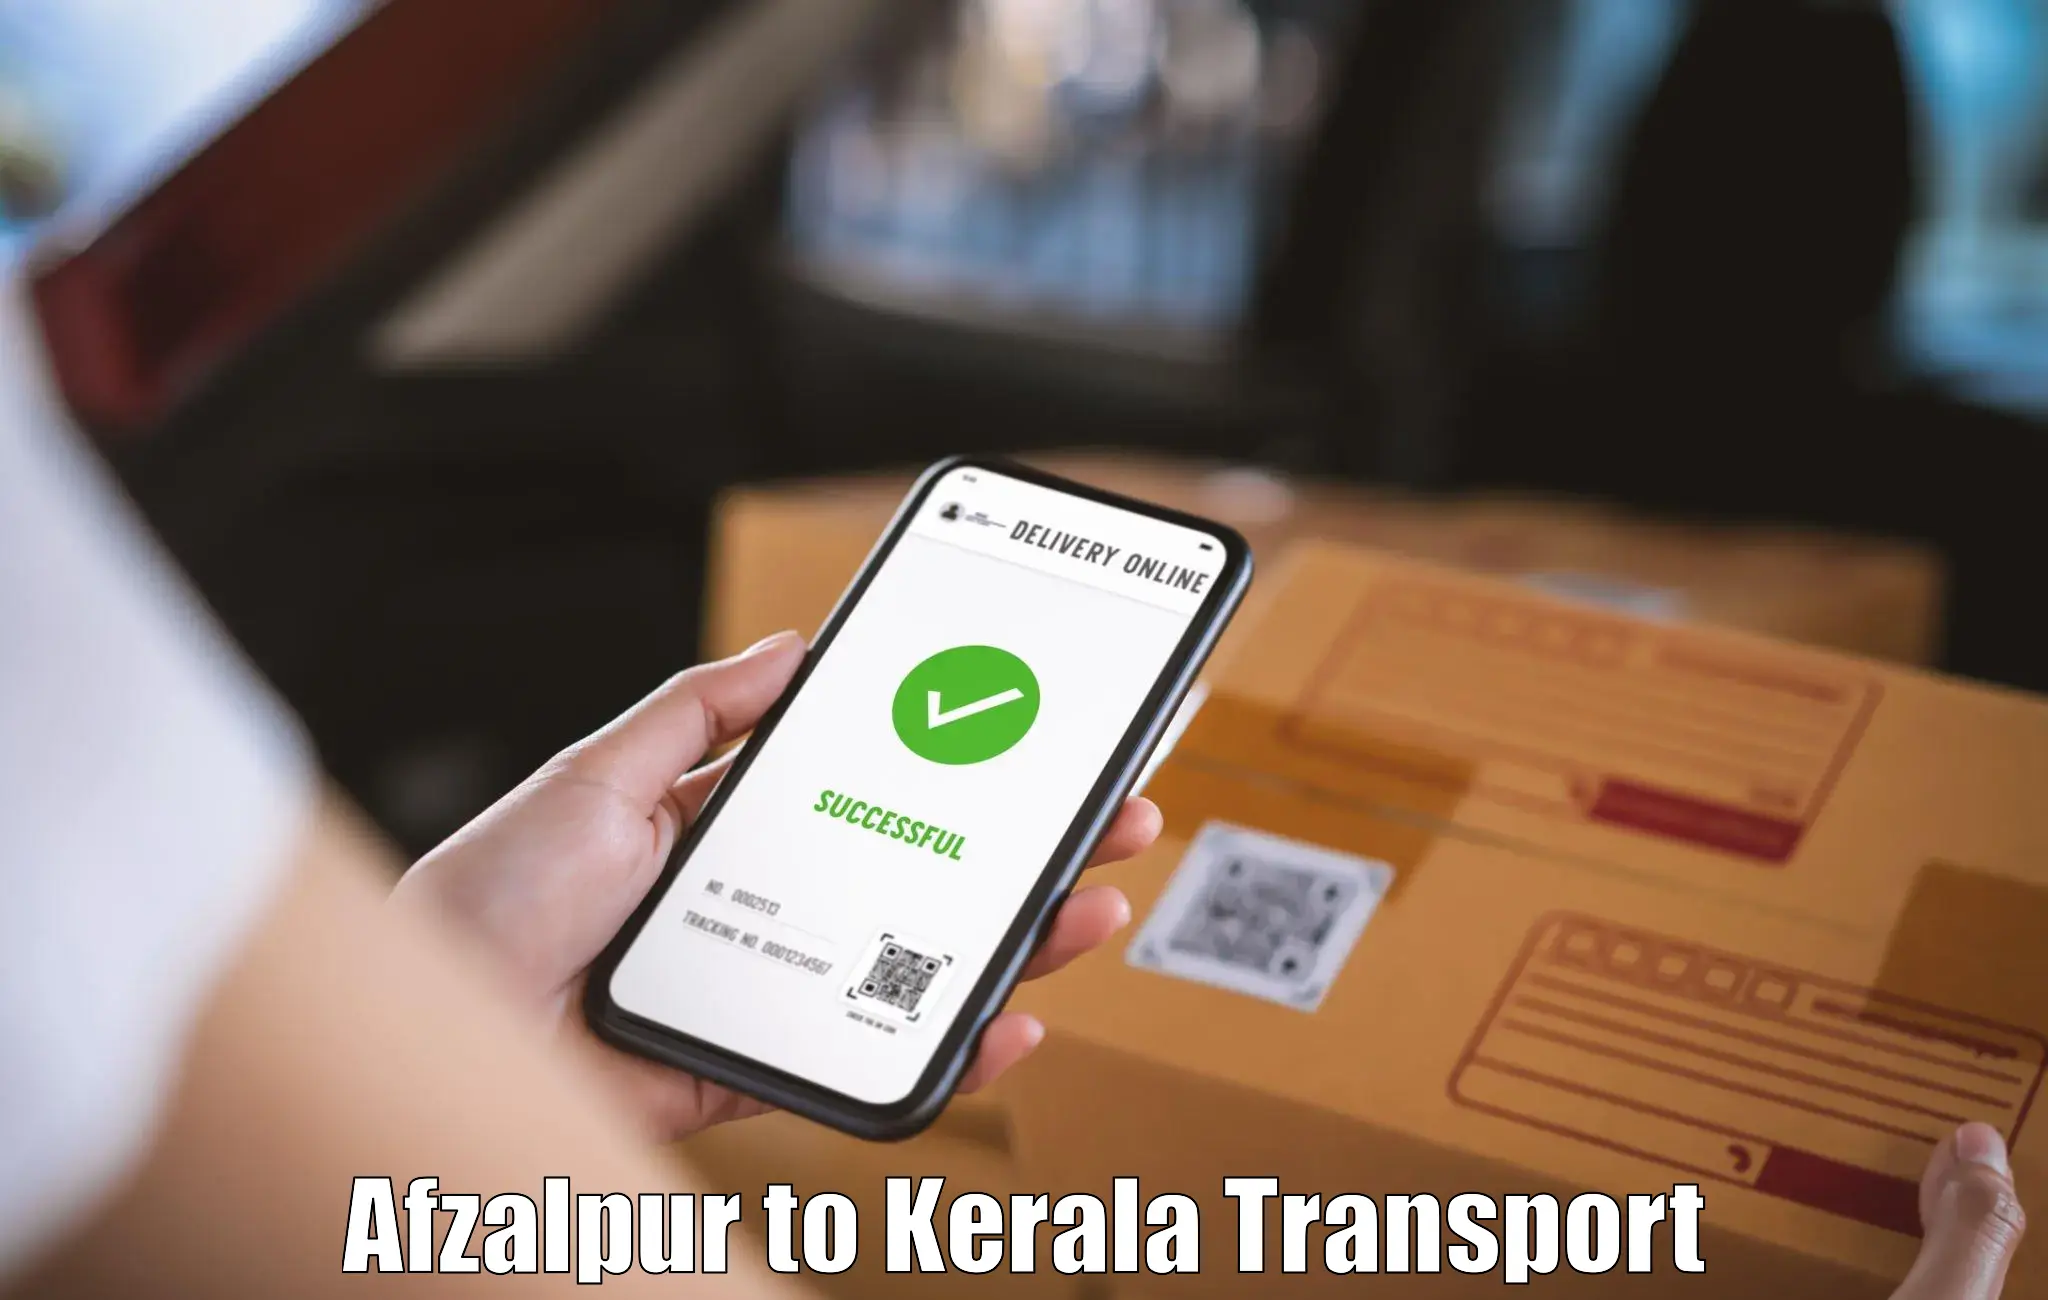 Two wheeler transport services Afzalpur to Thalassery